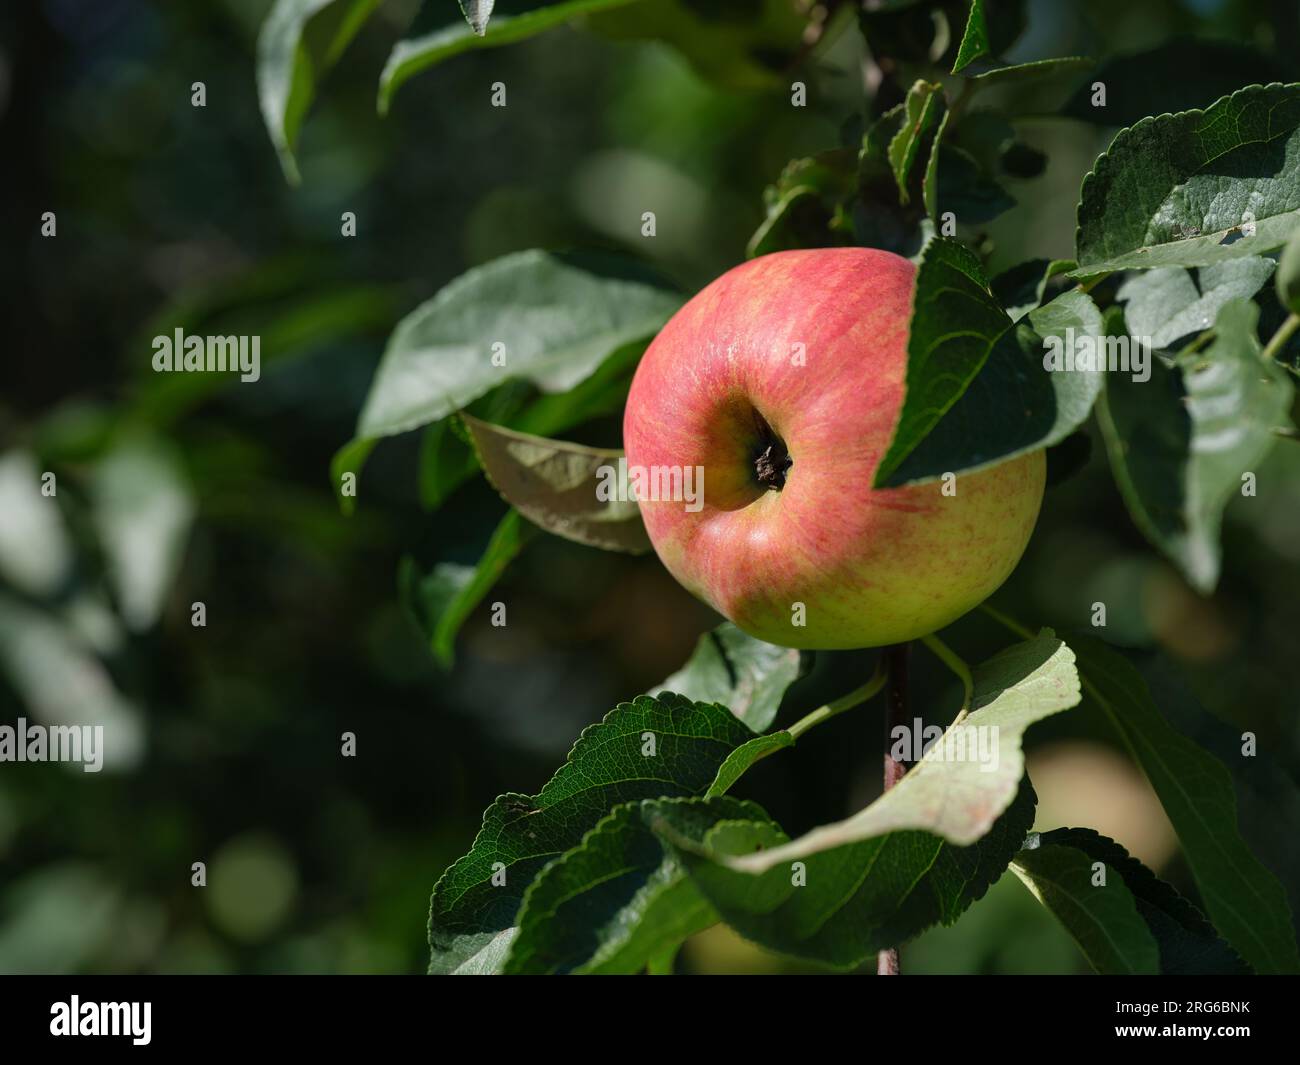 An organic apple hanging on an apple tree branch. Close up. Stock Photo